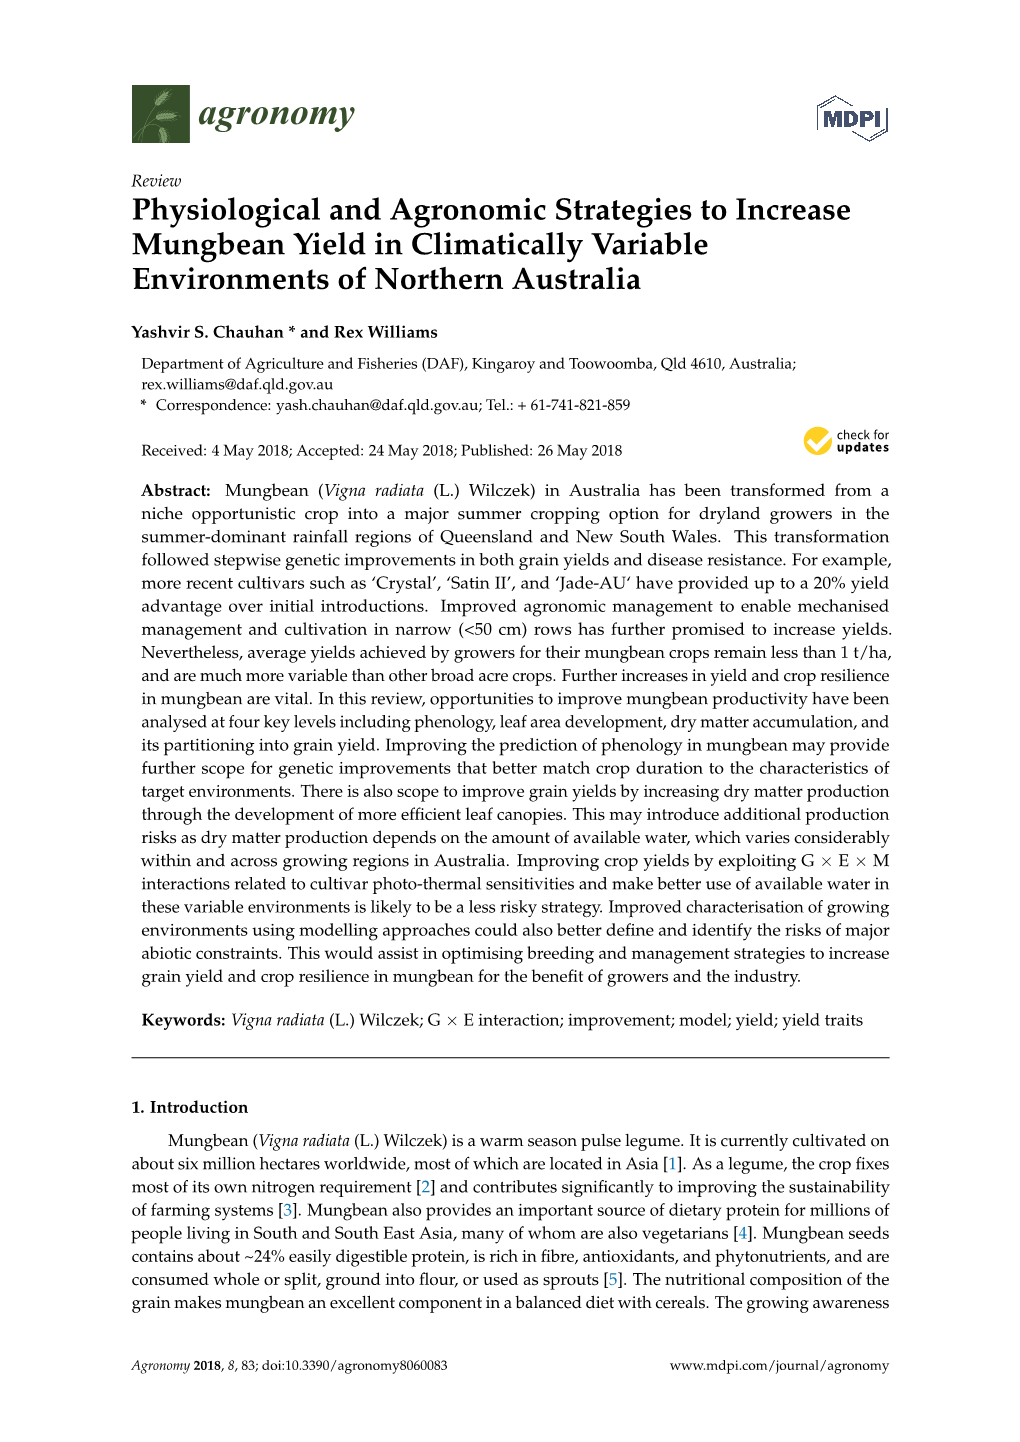 Physiological and Agronomic Strategies to Increase Mungbean Yield in Climatically Variable Environments of Northern Australia